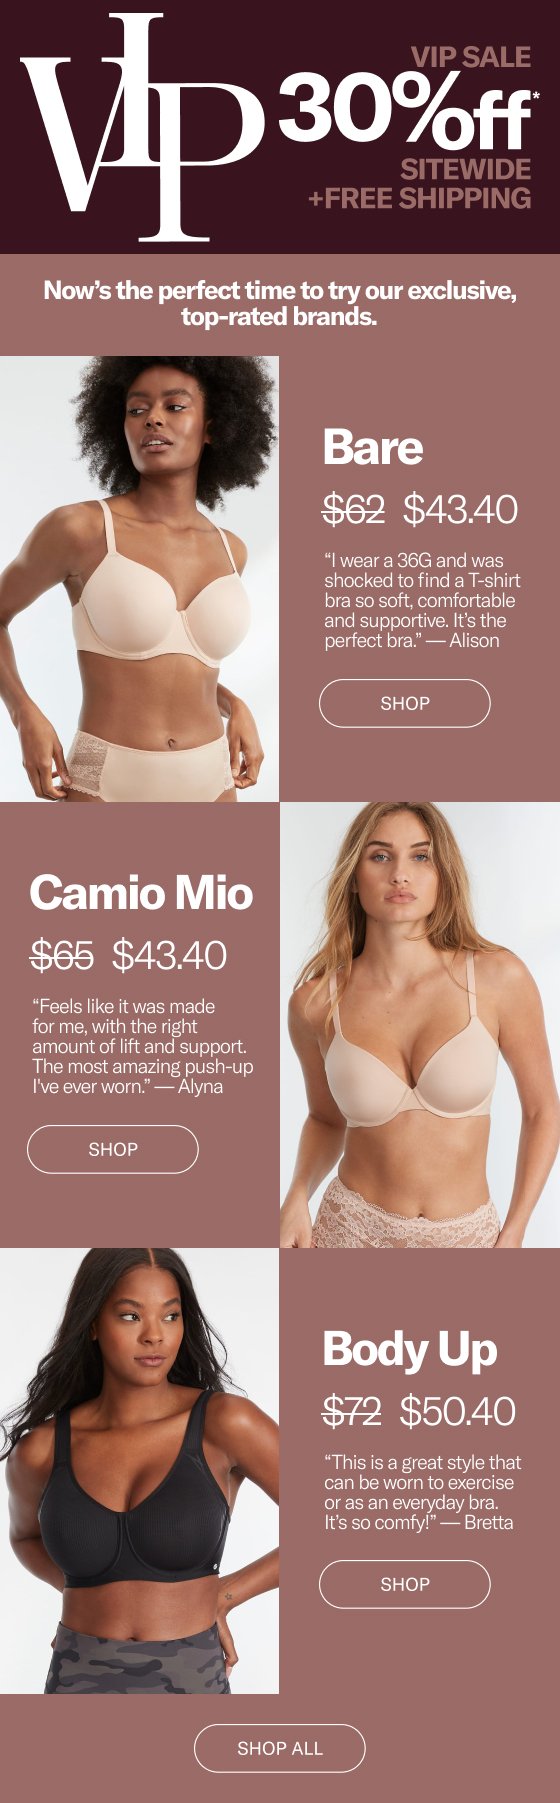 Customer-Tested, Customer-Approved Bras: 30% Off & Free Shipping